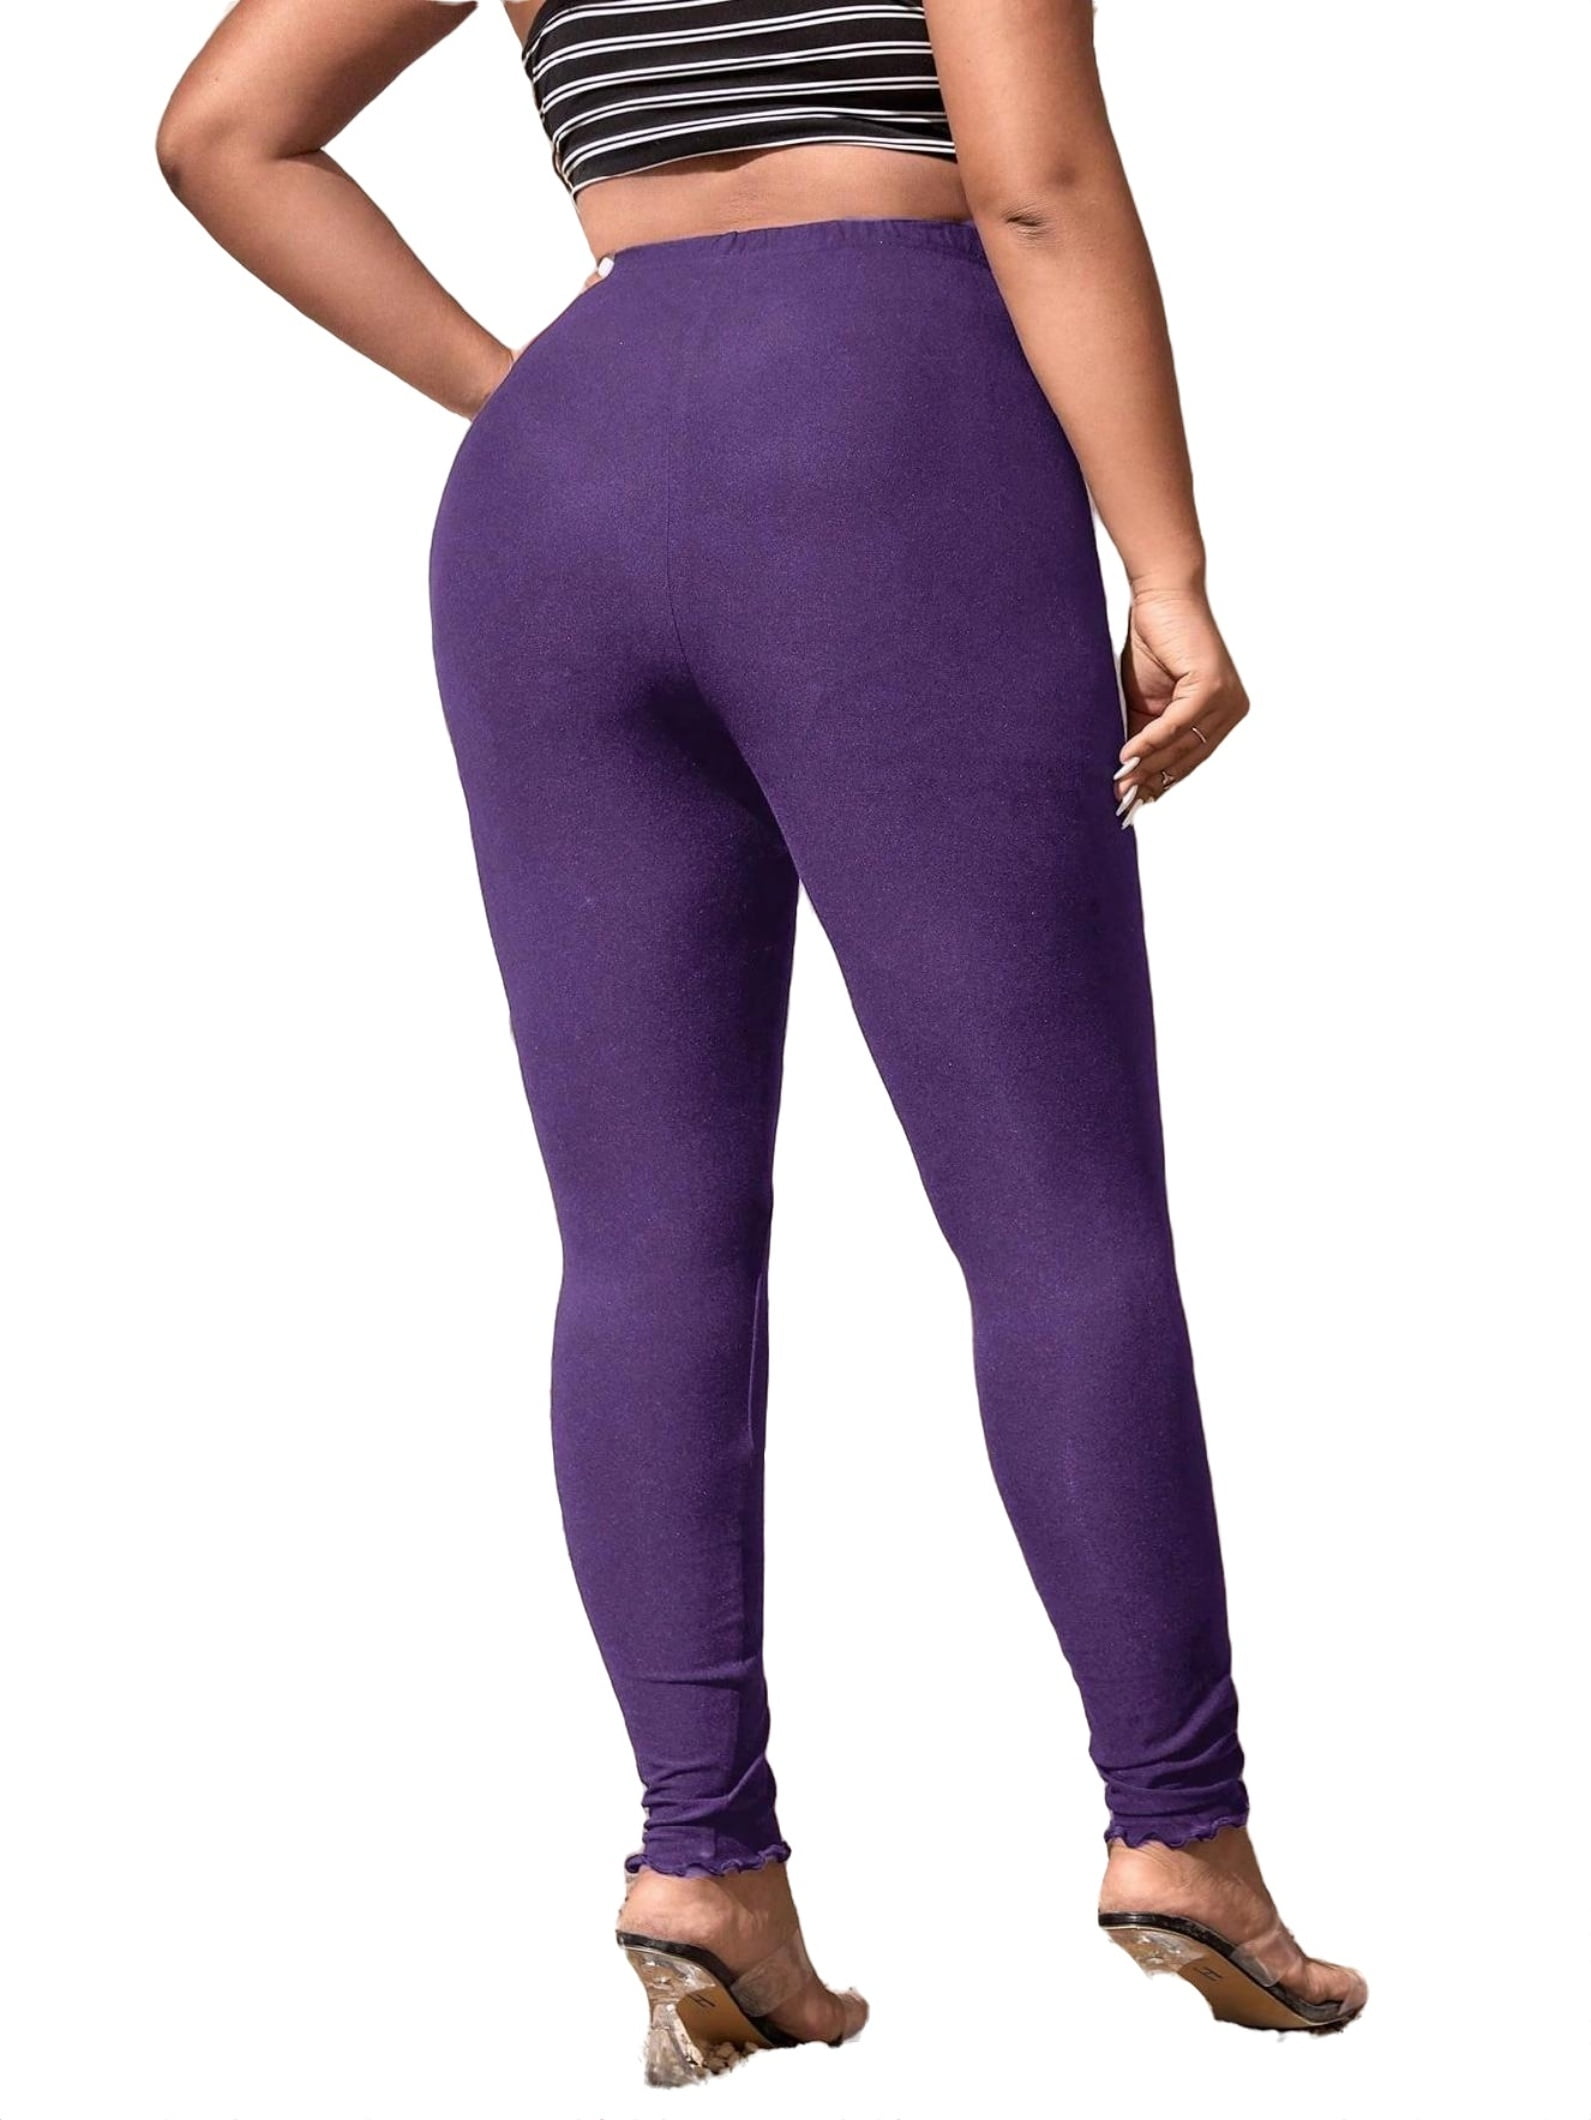 Footless Violet Patch Plaid Plus Size Leggings - Fashion Outlet NYC